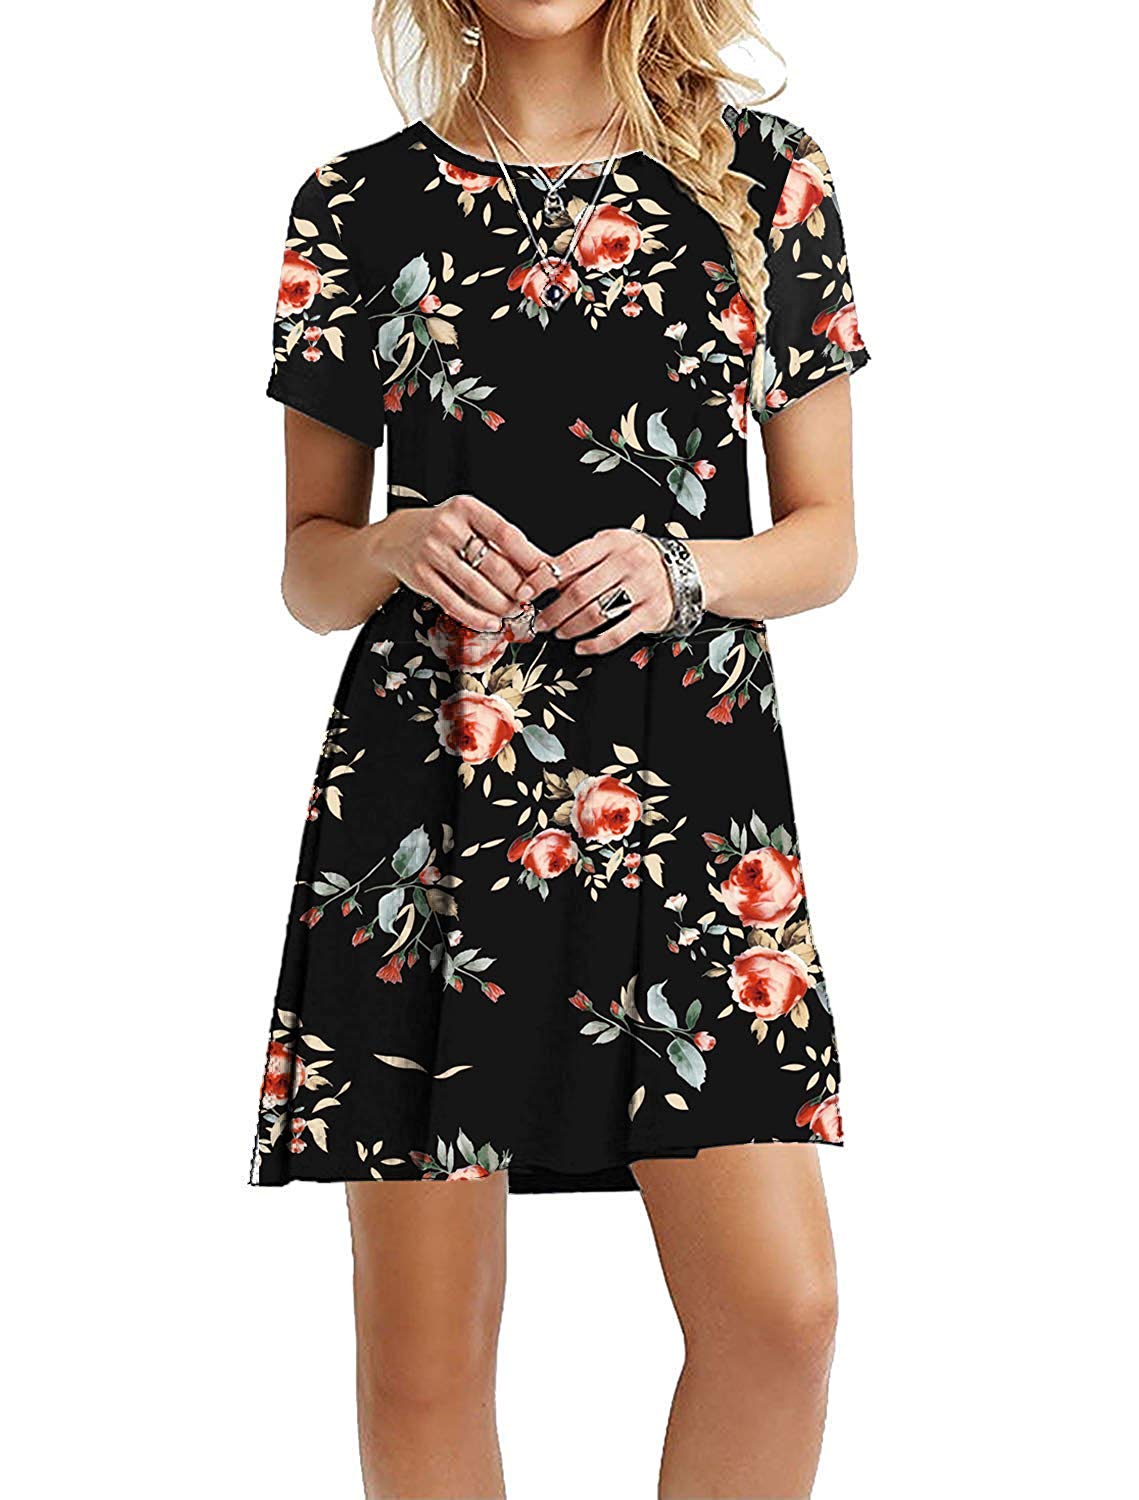 Red Rose Floral Print Dress – Loose Fit Soft Stretchy Summer Wear ...